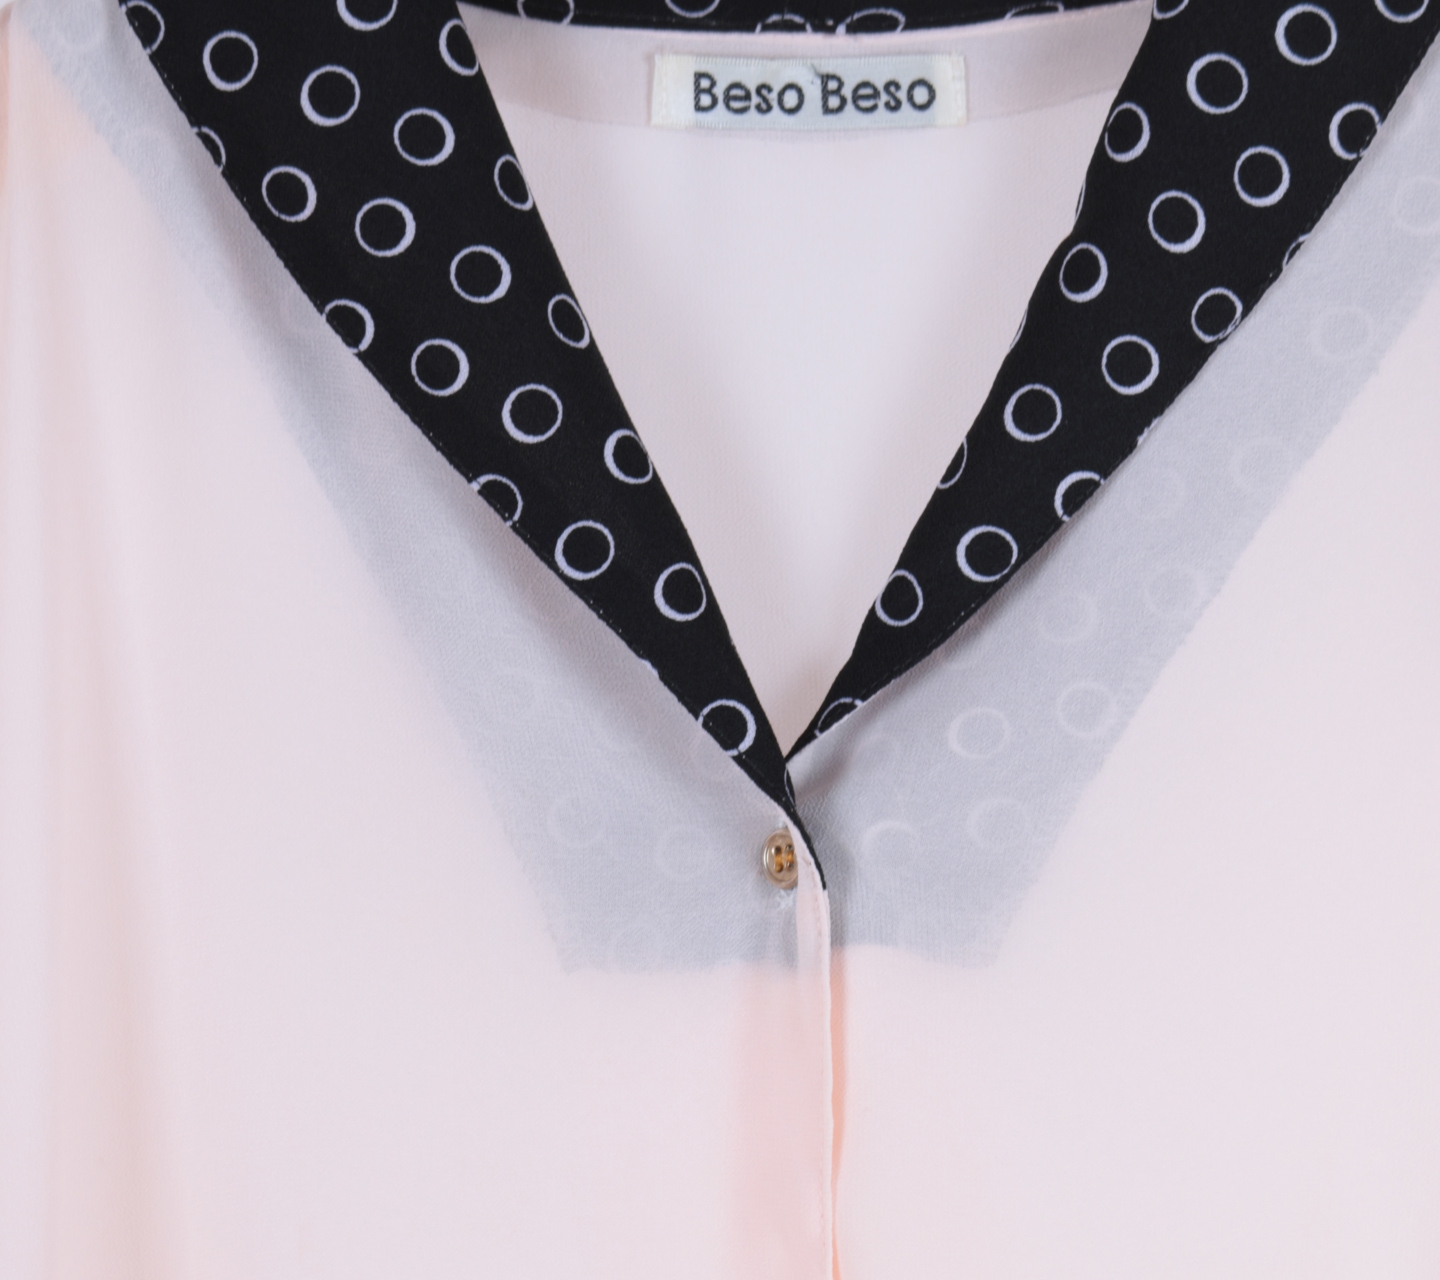 Beso Beso Peach Dotted Collar Shirt